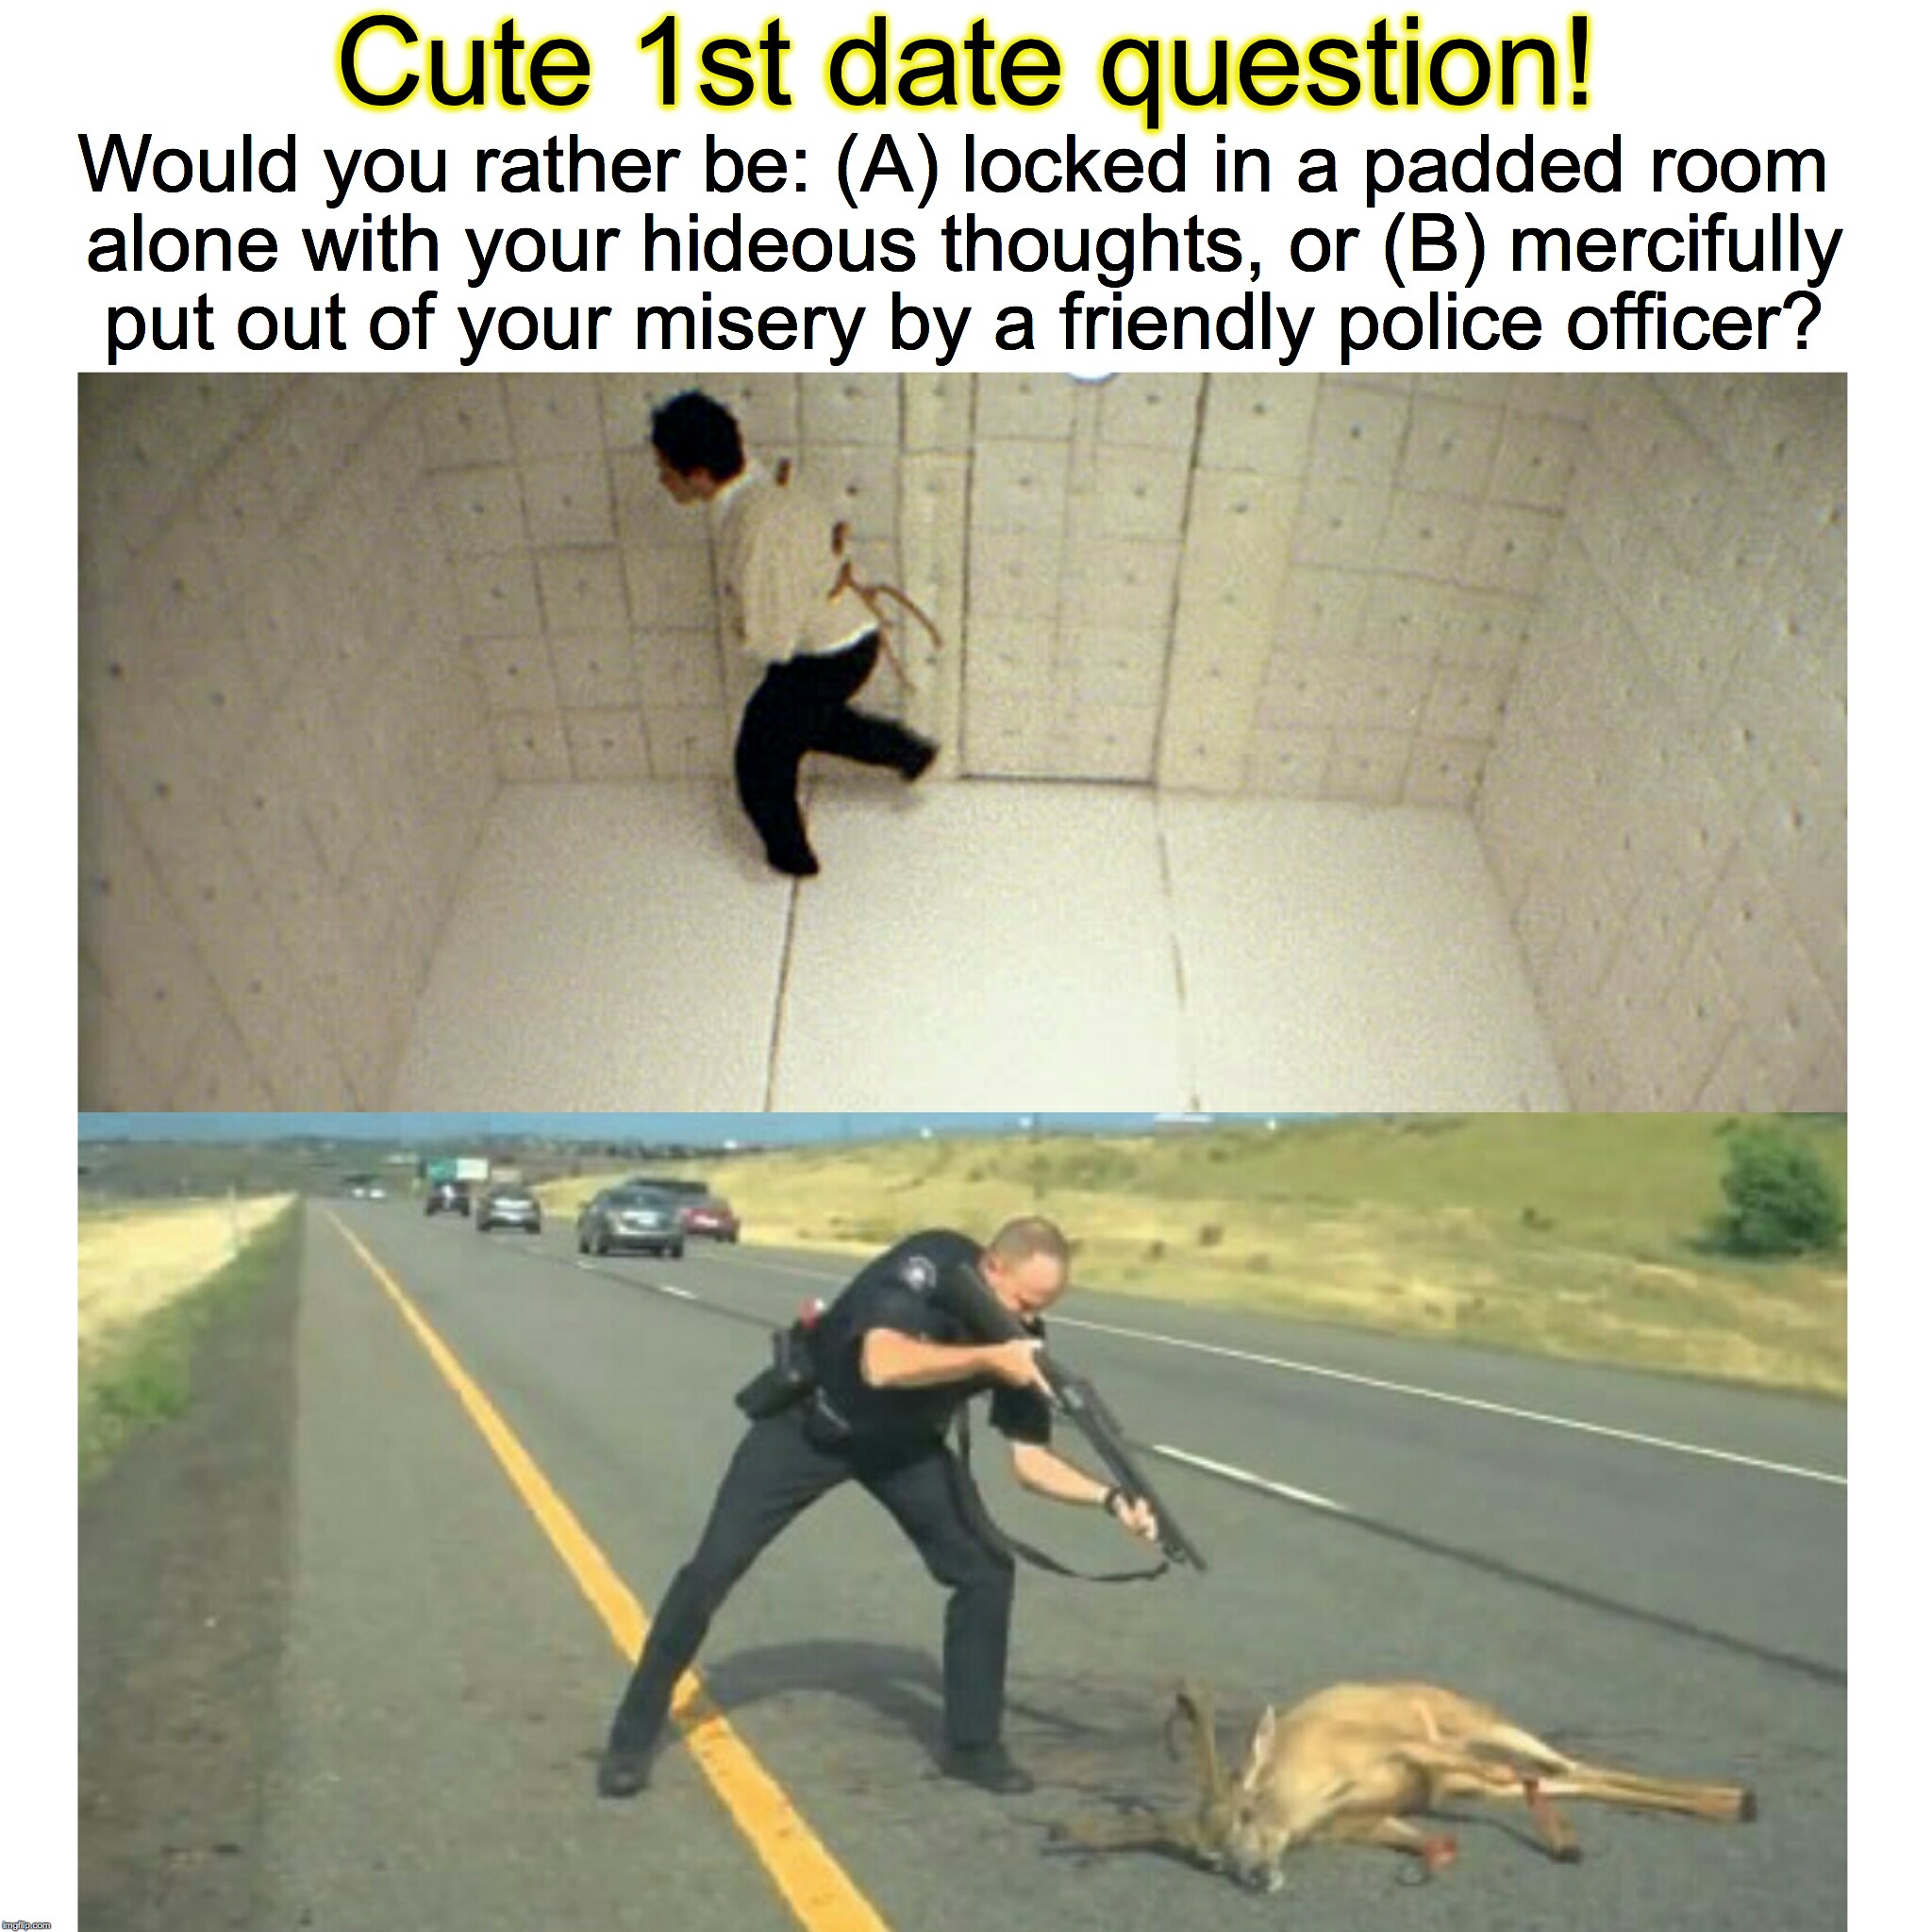 Just Put Me Outta My Misery | Cute 1st date question! Would you rather be: (A) locked in a padded room alone with your hideous thoughts, or (B) mercifully put out of your misery by a friendly police officer? | image tagged in dating,online dating,tinder,police brutality,mental hospital,original meme | made w/ Imgflip meme maker